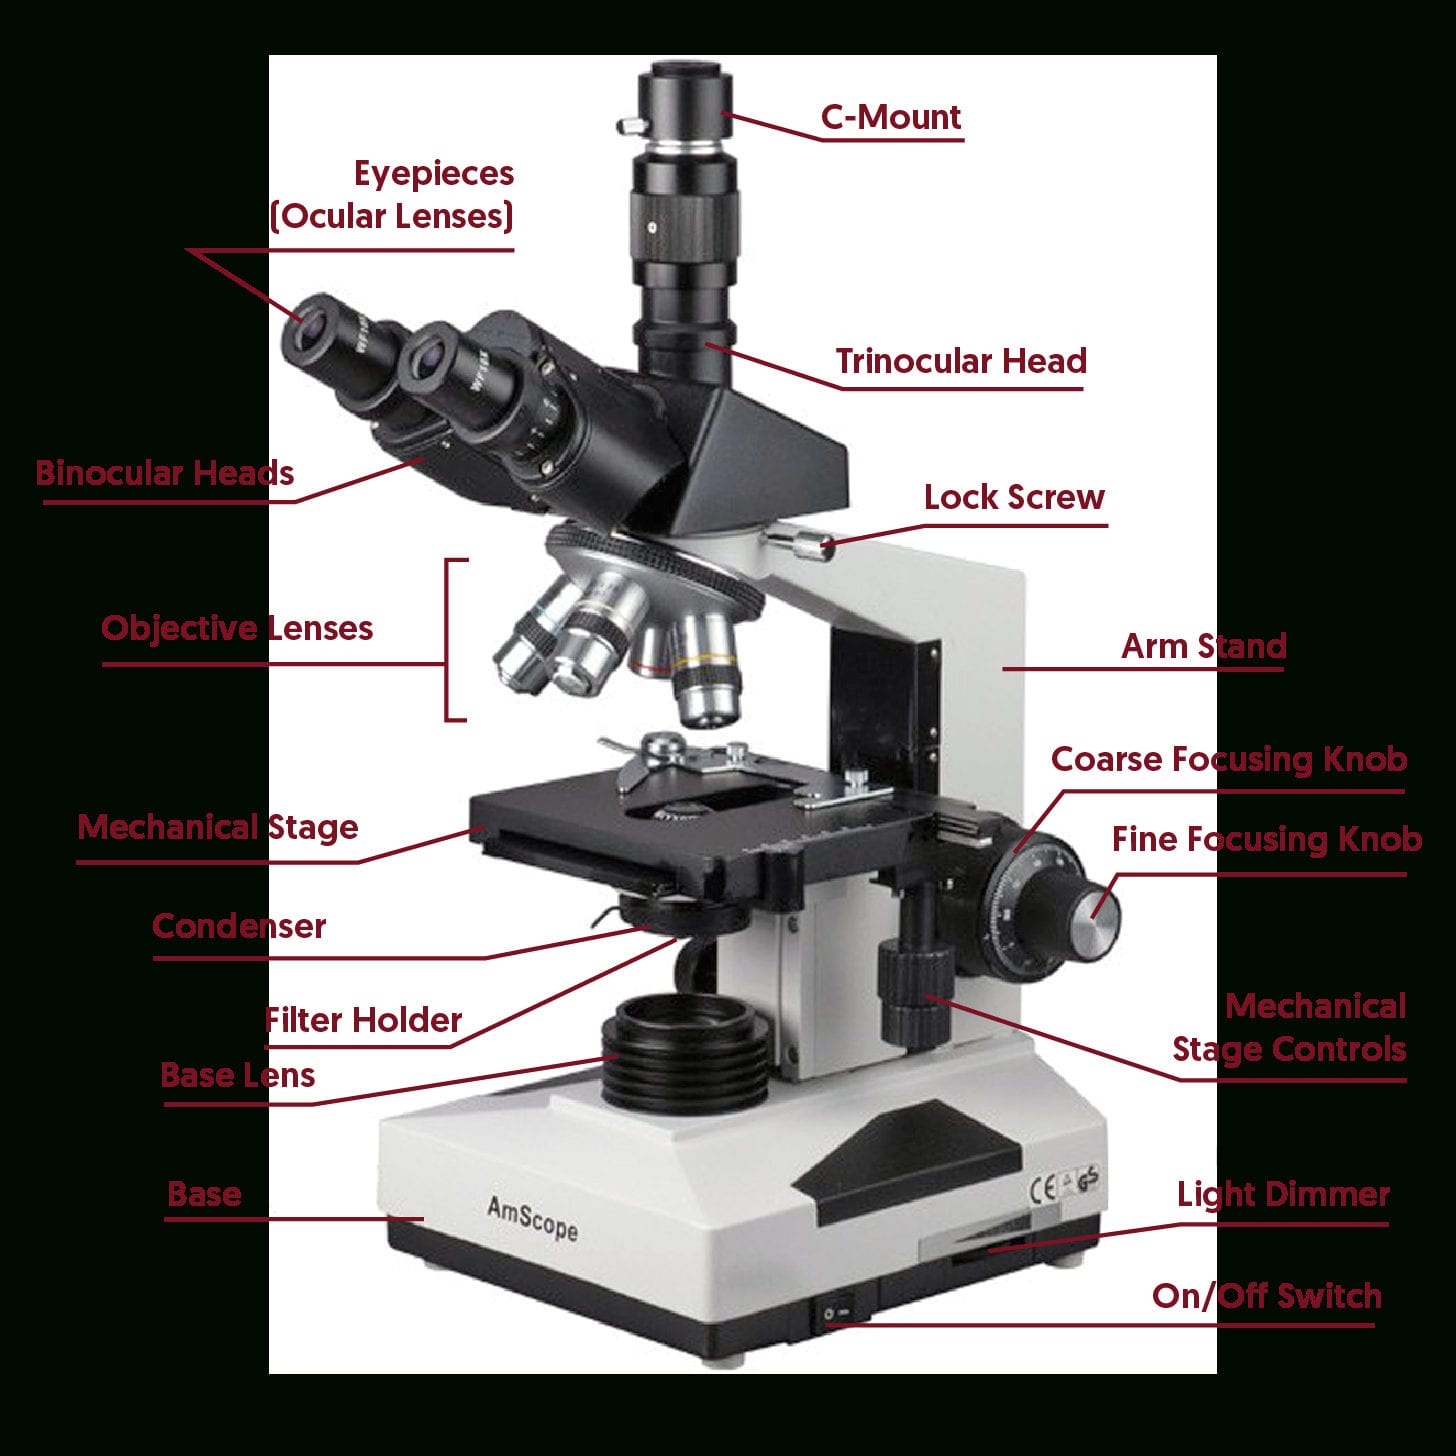 microscope-parts-and-use-worksheet-answer-key-db-excel